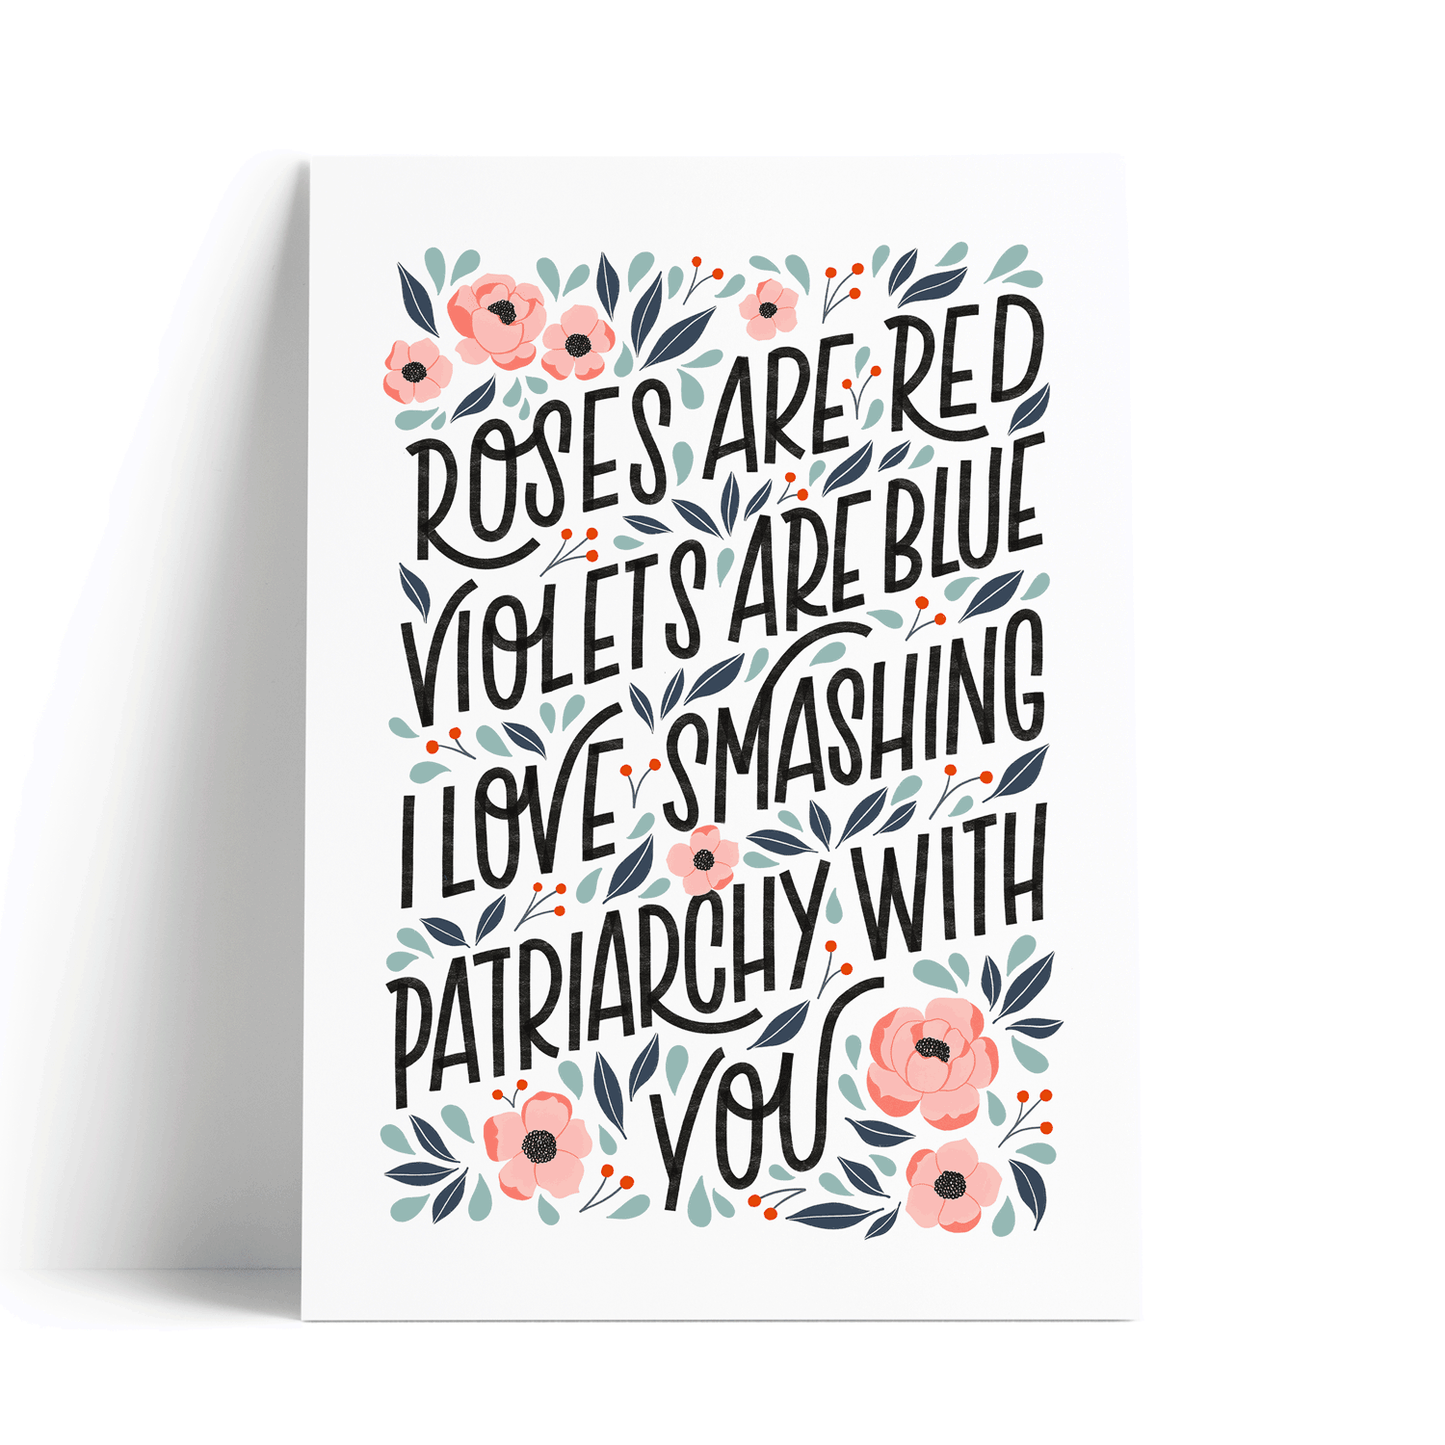 Print (plakát) Roses Are Red Violets Are Blue I Love Smashing Patriarchy With You